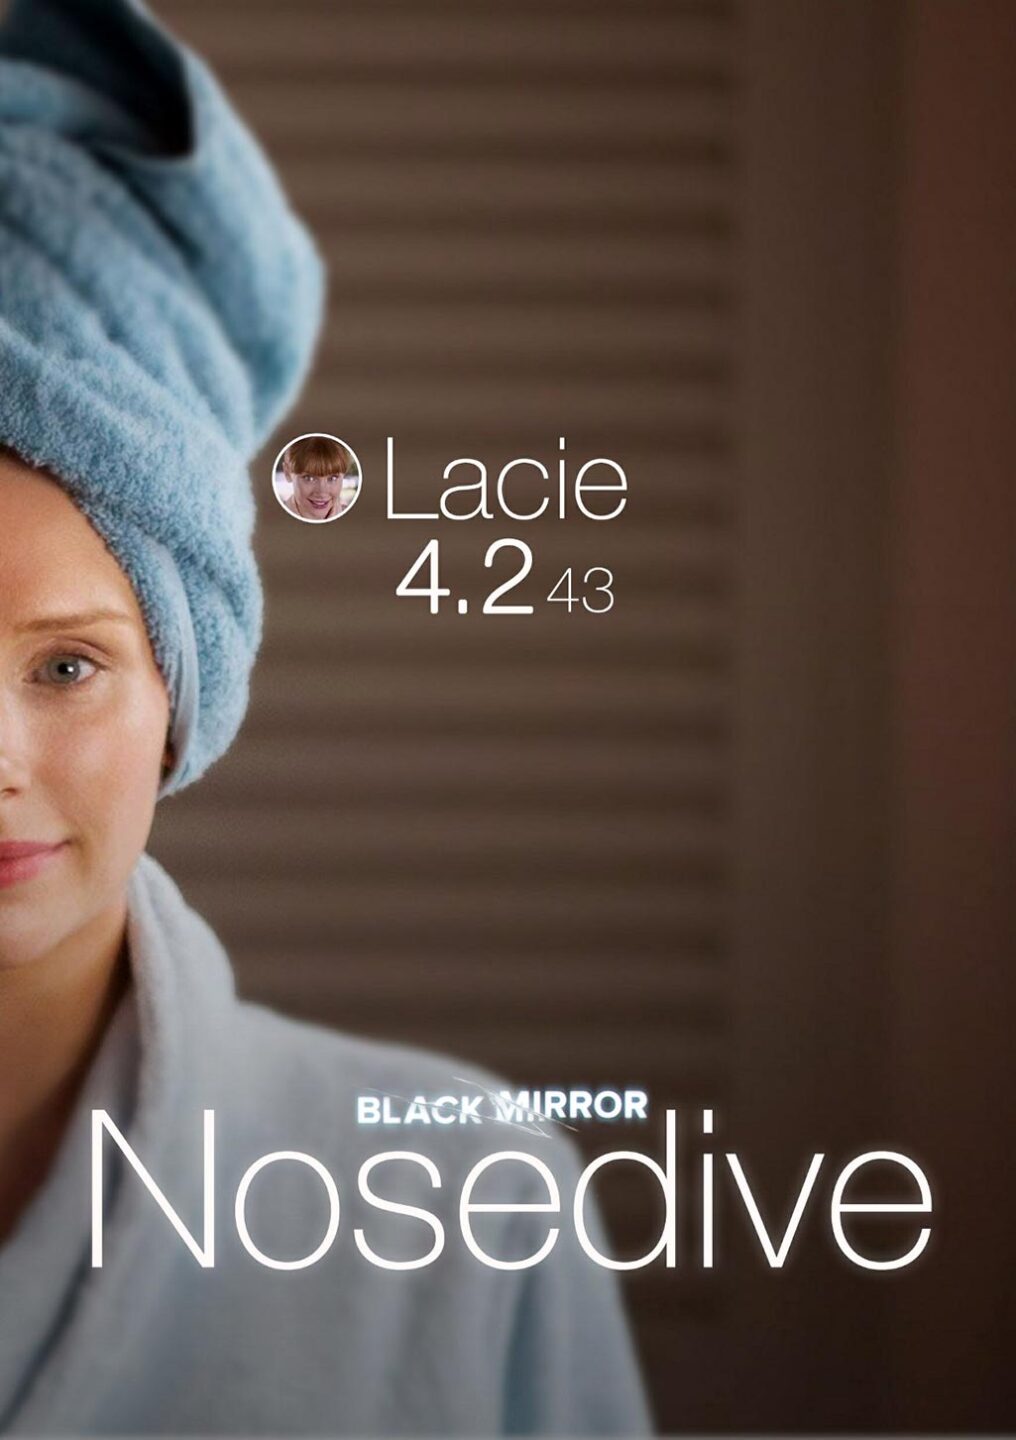 Lacie is rated 4.243 in this promotional poster for Black Mirror's third season